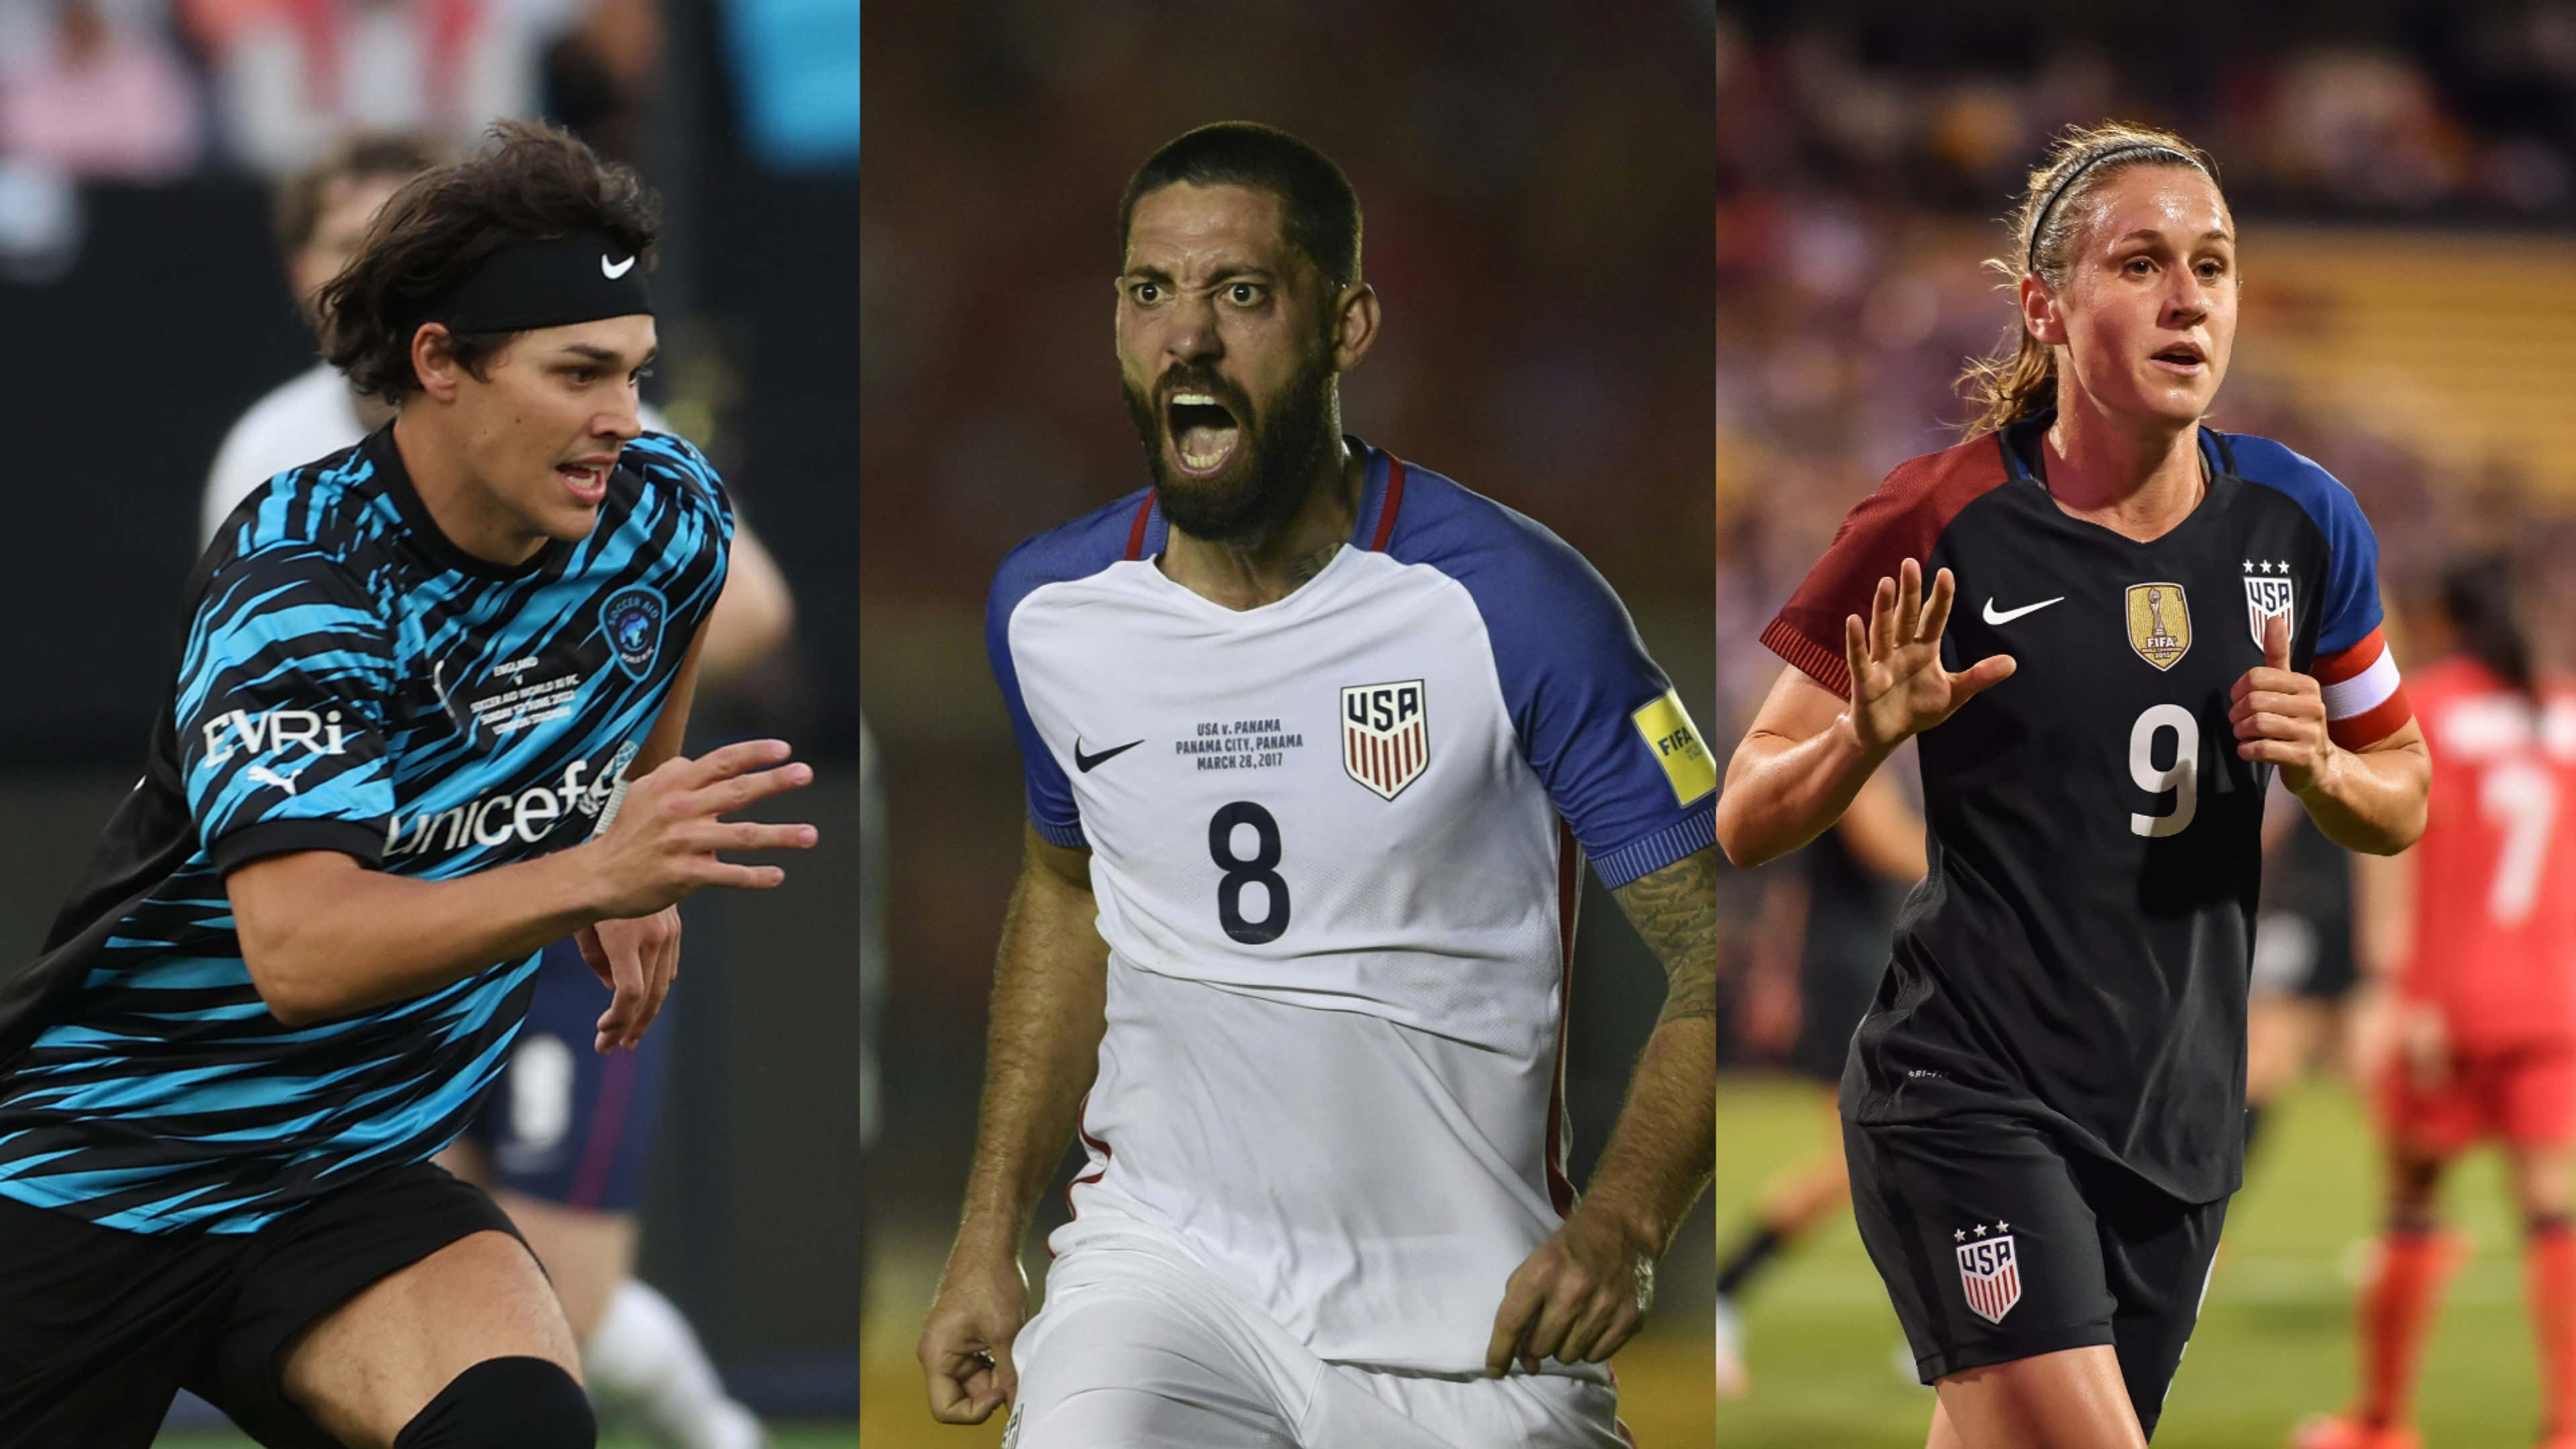 From Wrexham to USWNT and from Noah Beck to Clint Dempsey